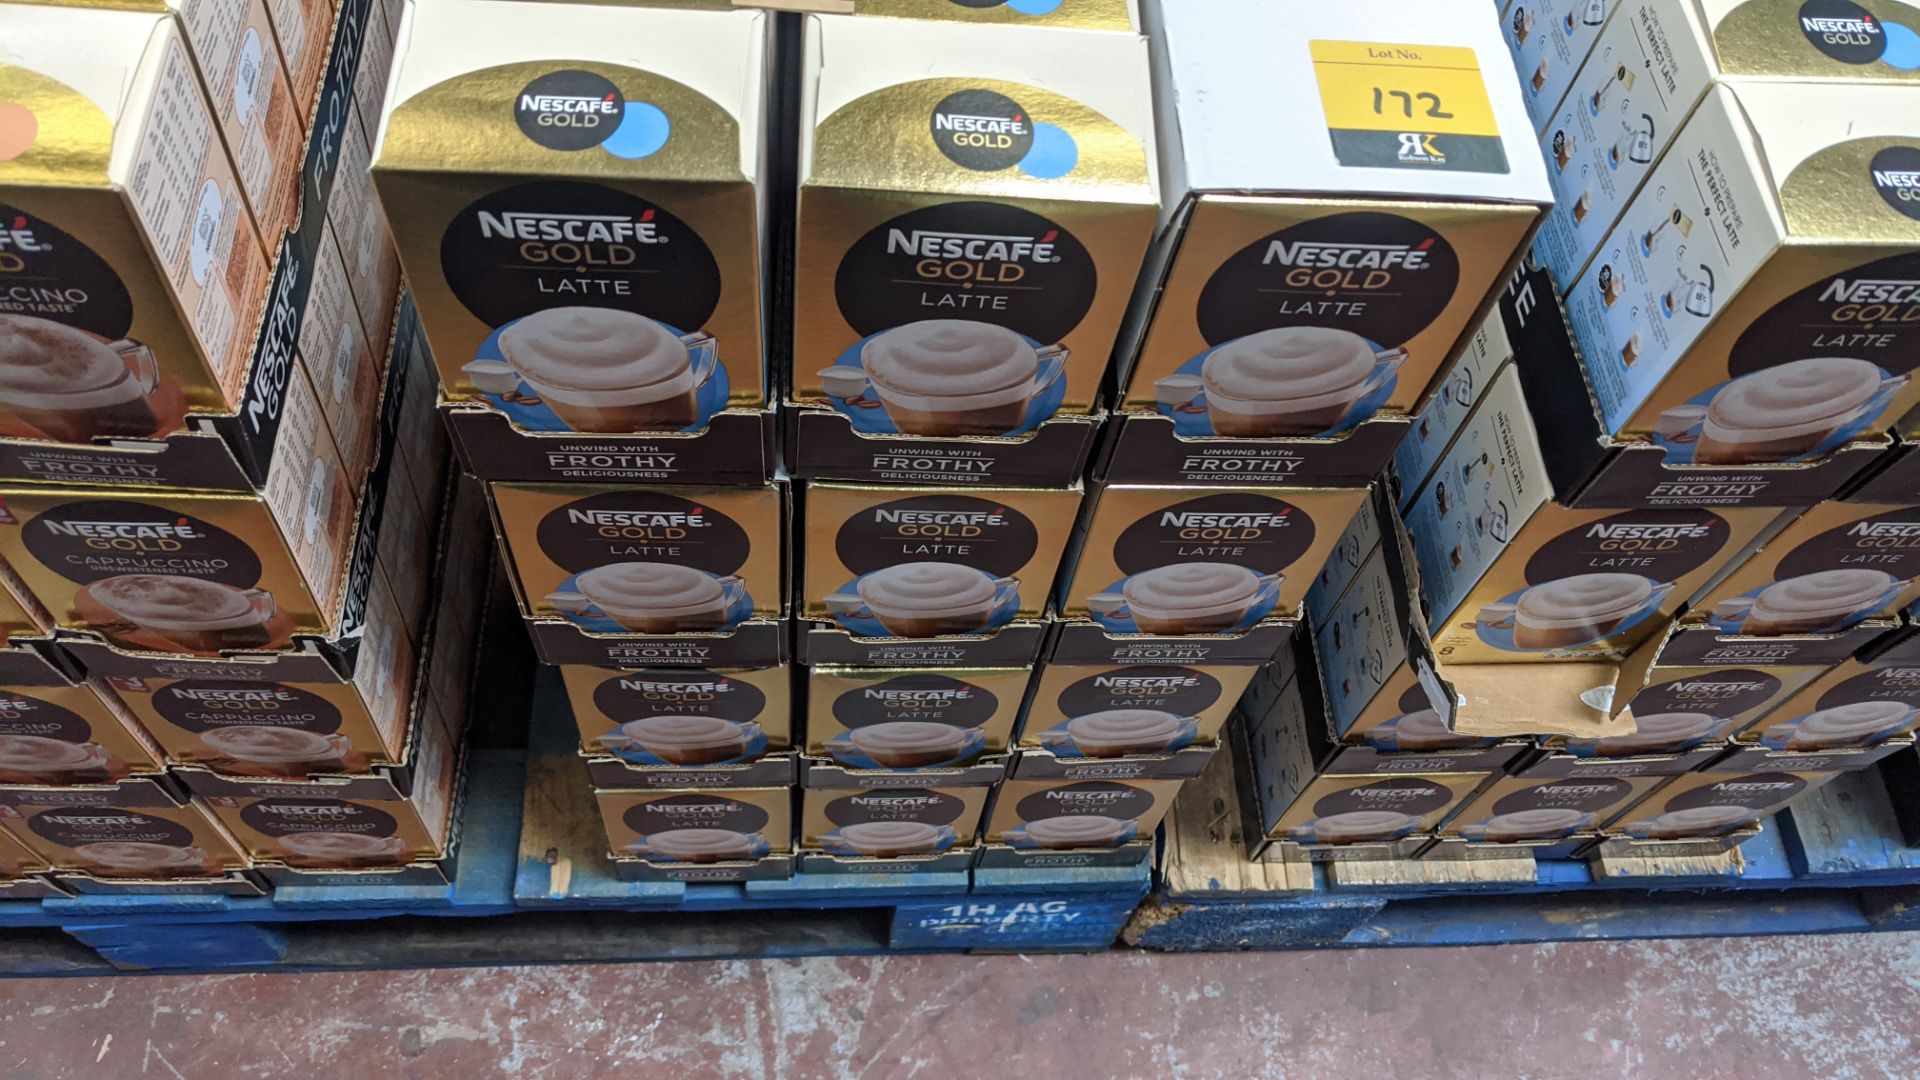 72 boxes of Nescafe Gold Latte Instant Coffee Drink - each box contains 8 off 22g sachets. IMPORTANT - Image 2 of 2